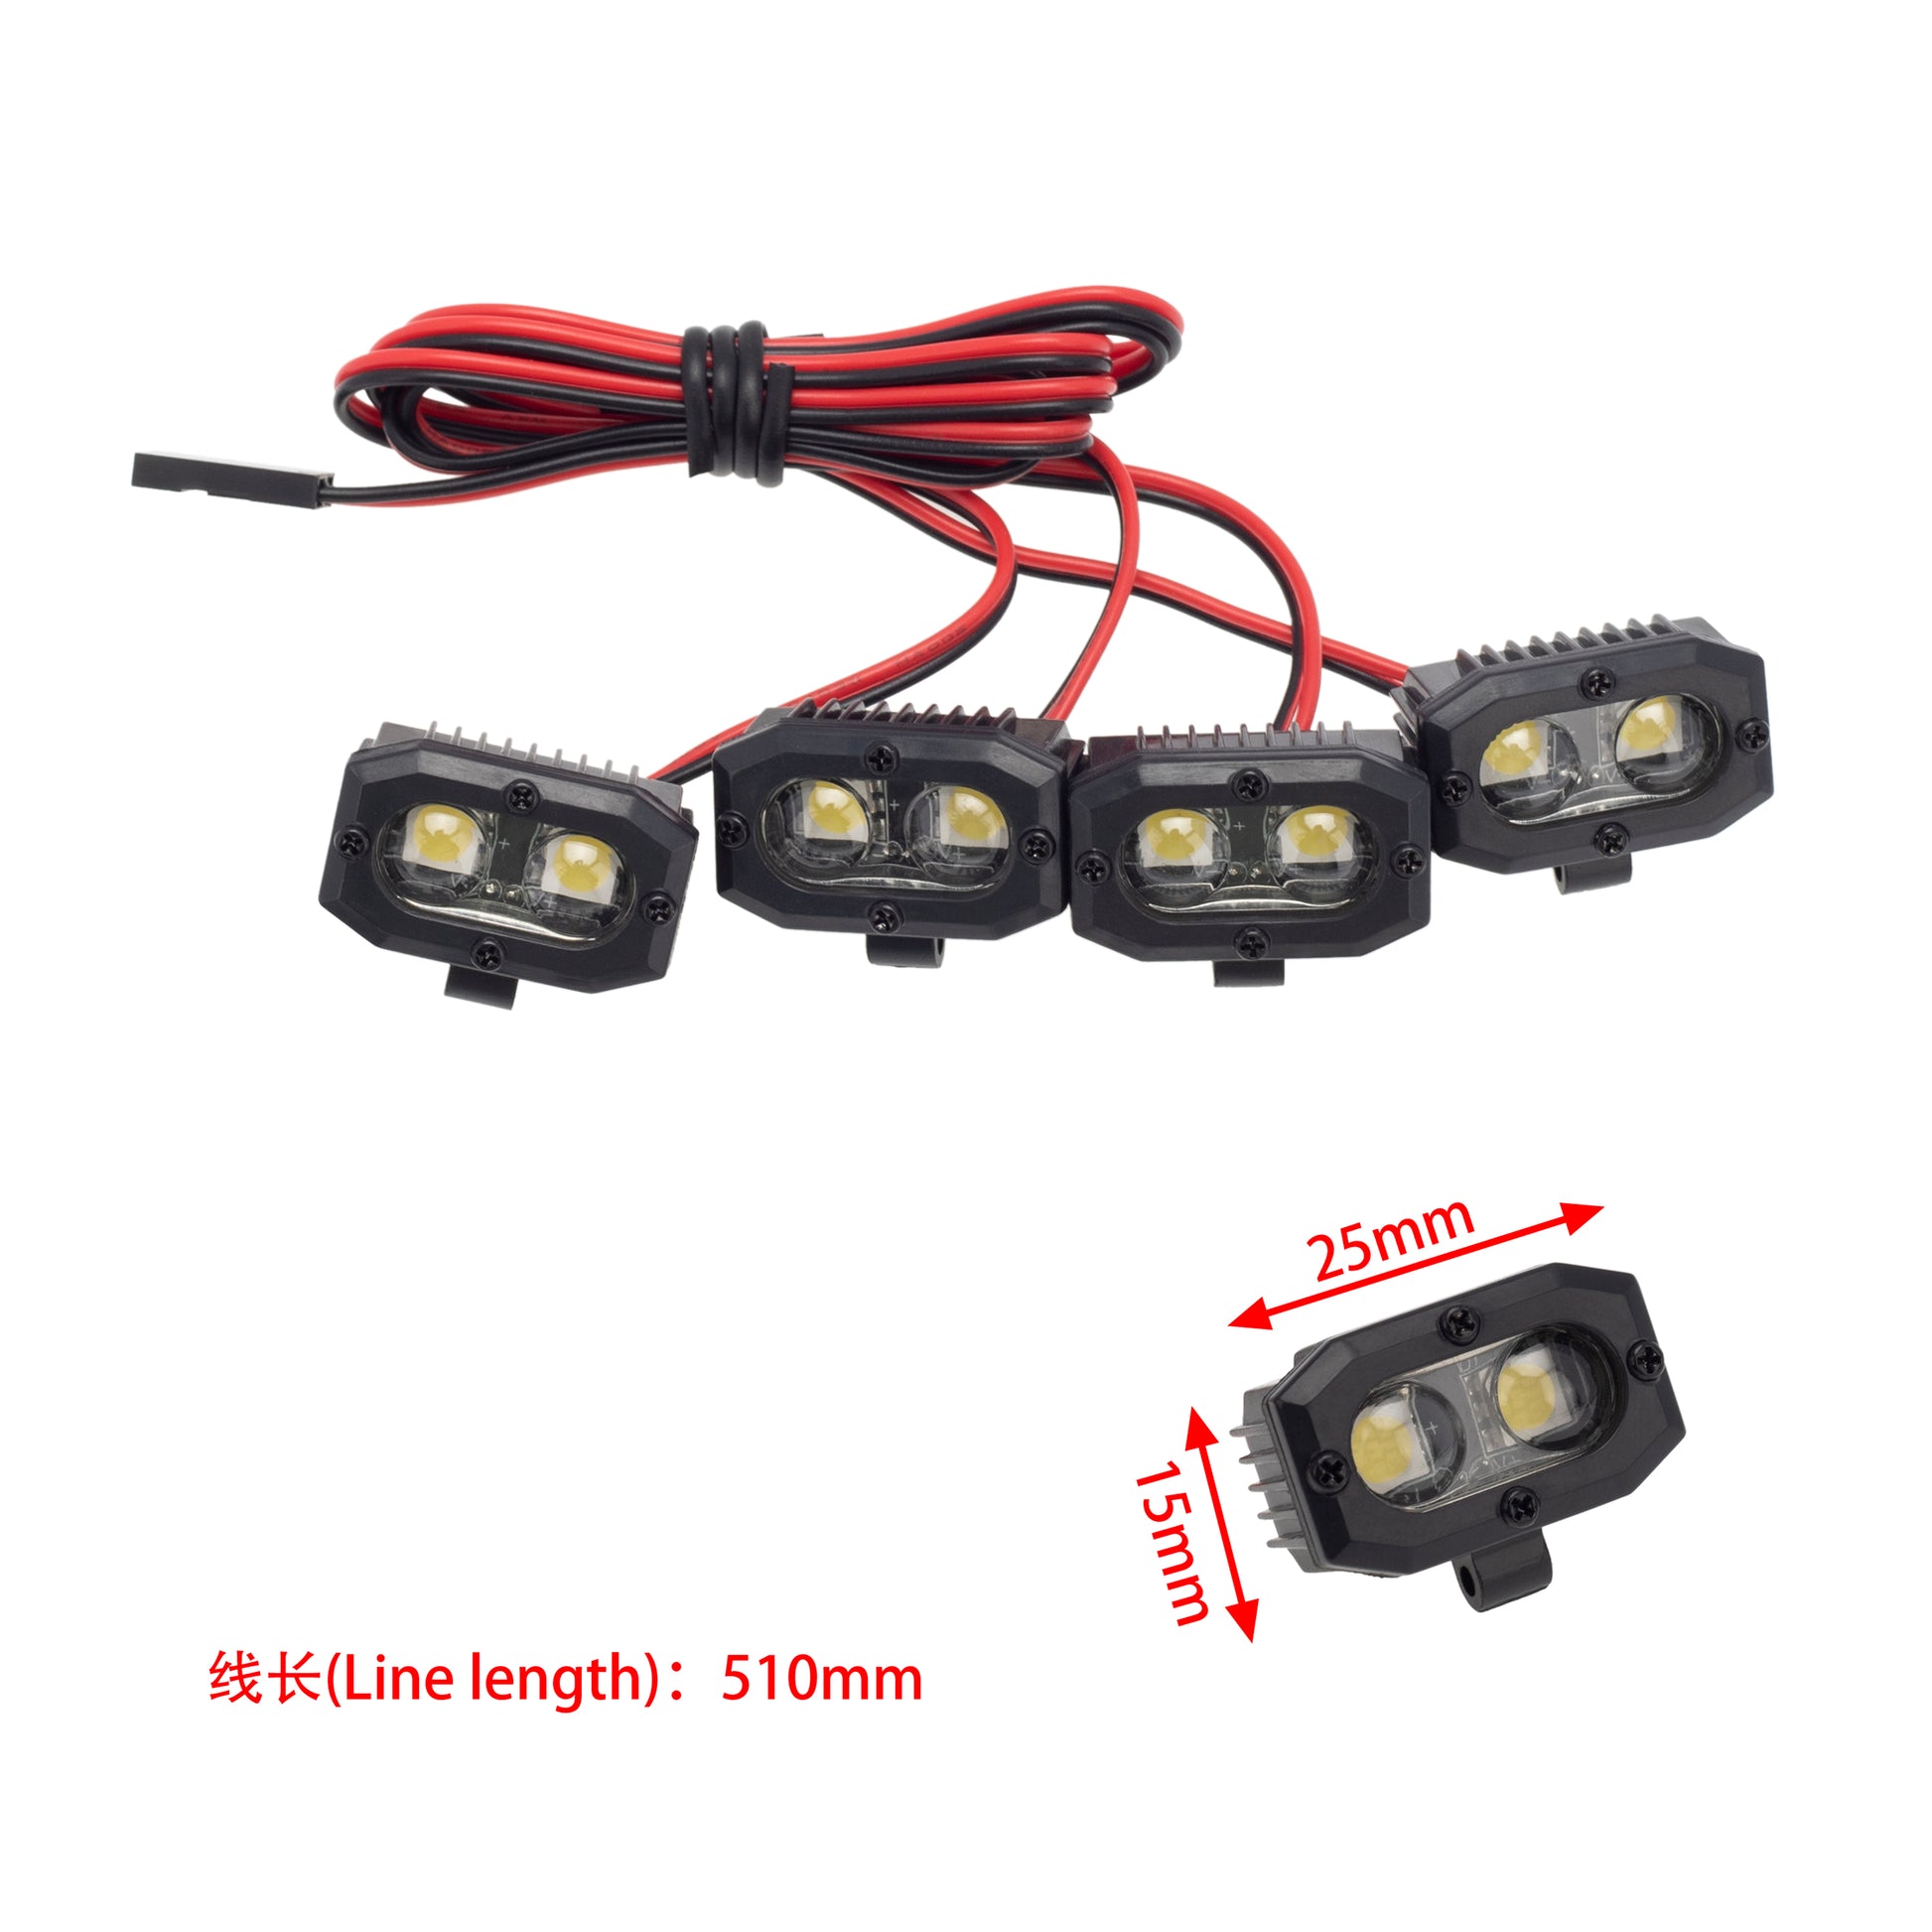 4 dual lights size without controller